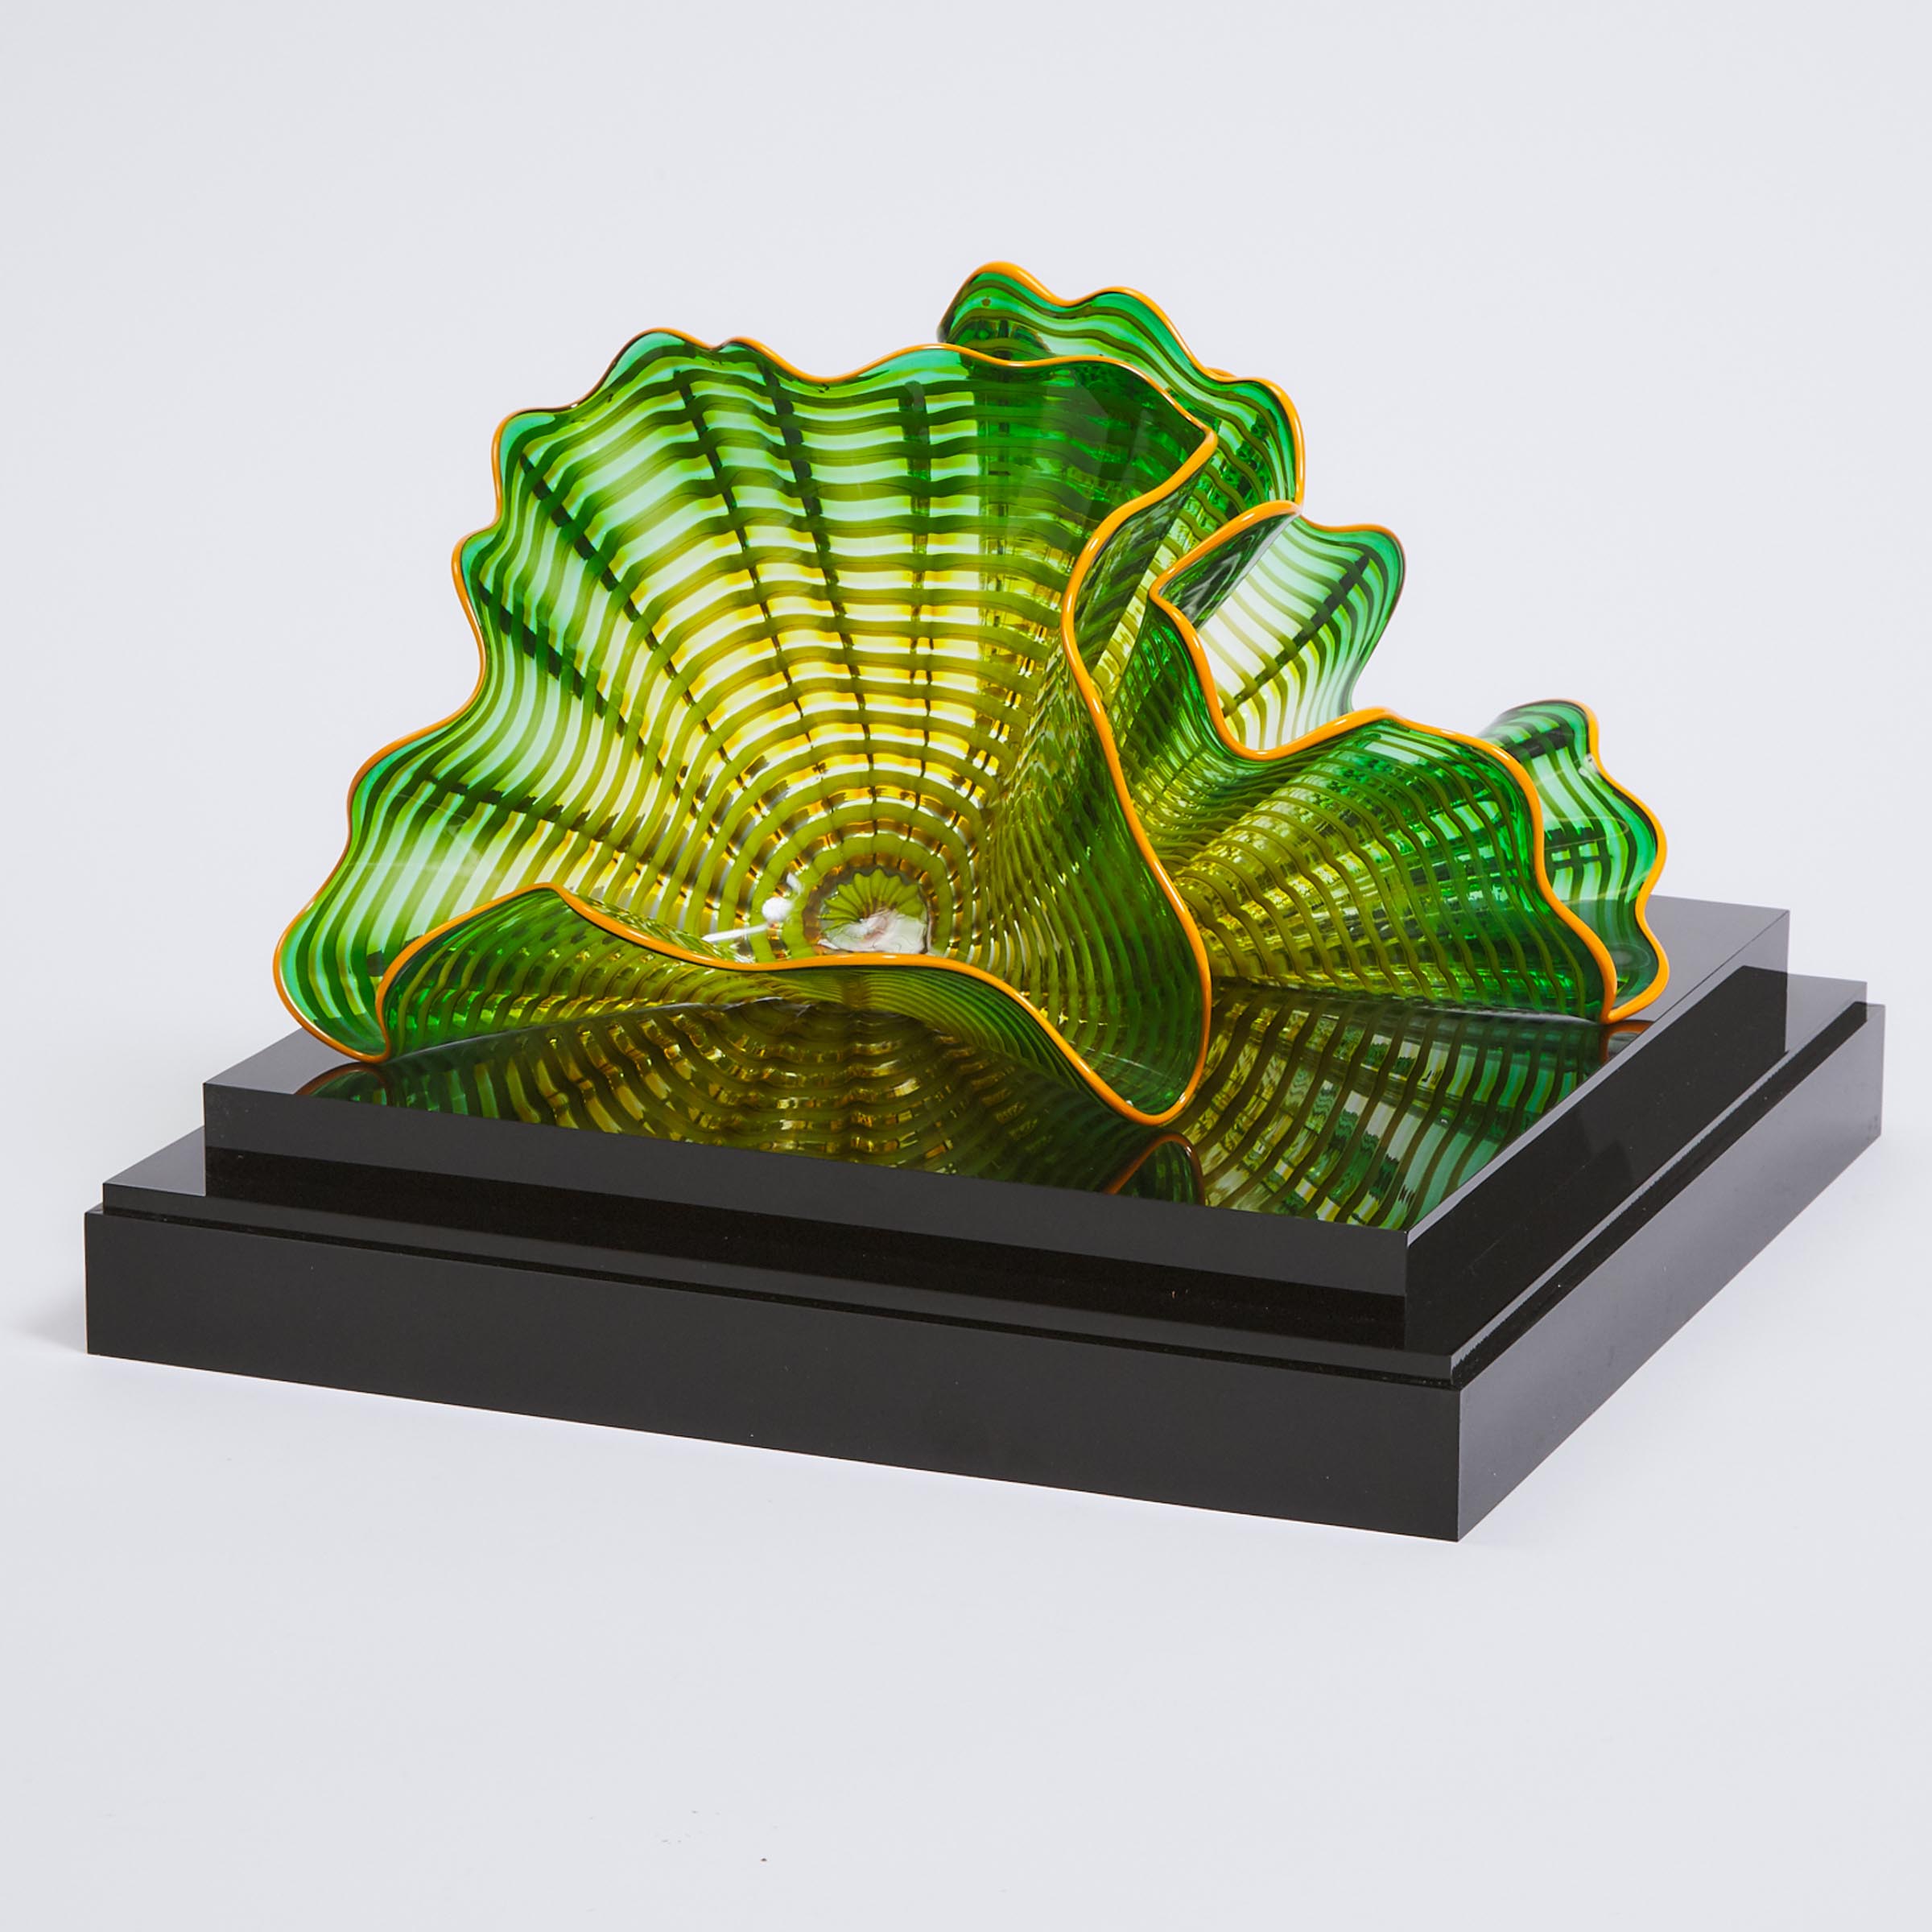 Dale Chihuly (American, b.1941), Laguna Persian Green Glass Group with Orange Lip Wraps, 2018